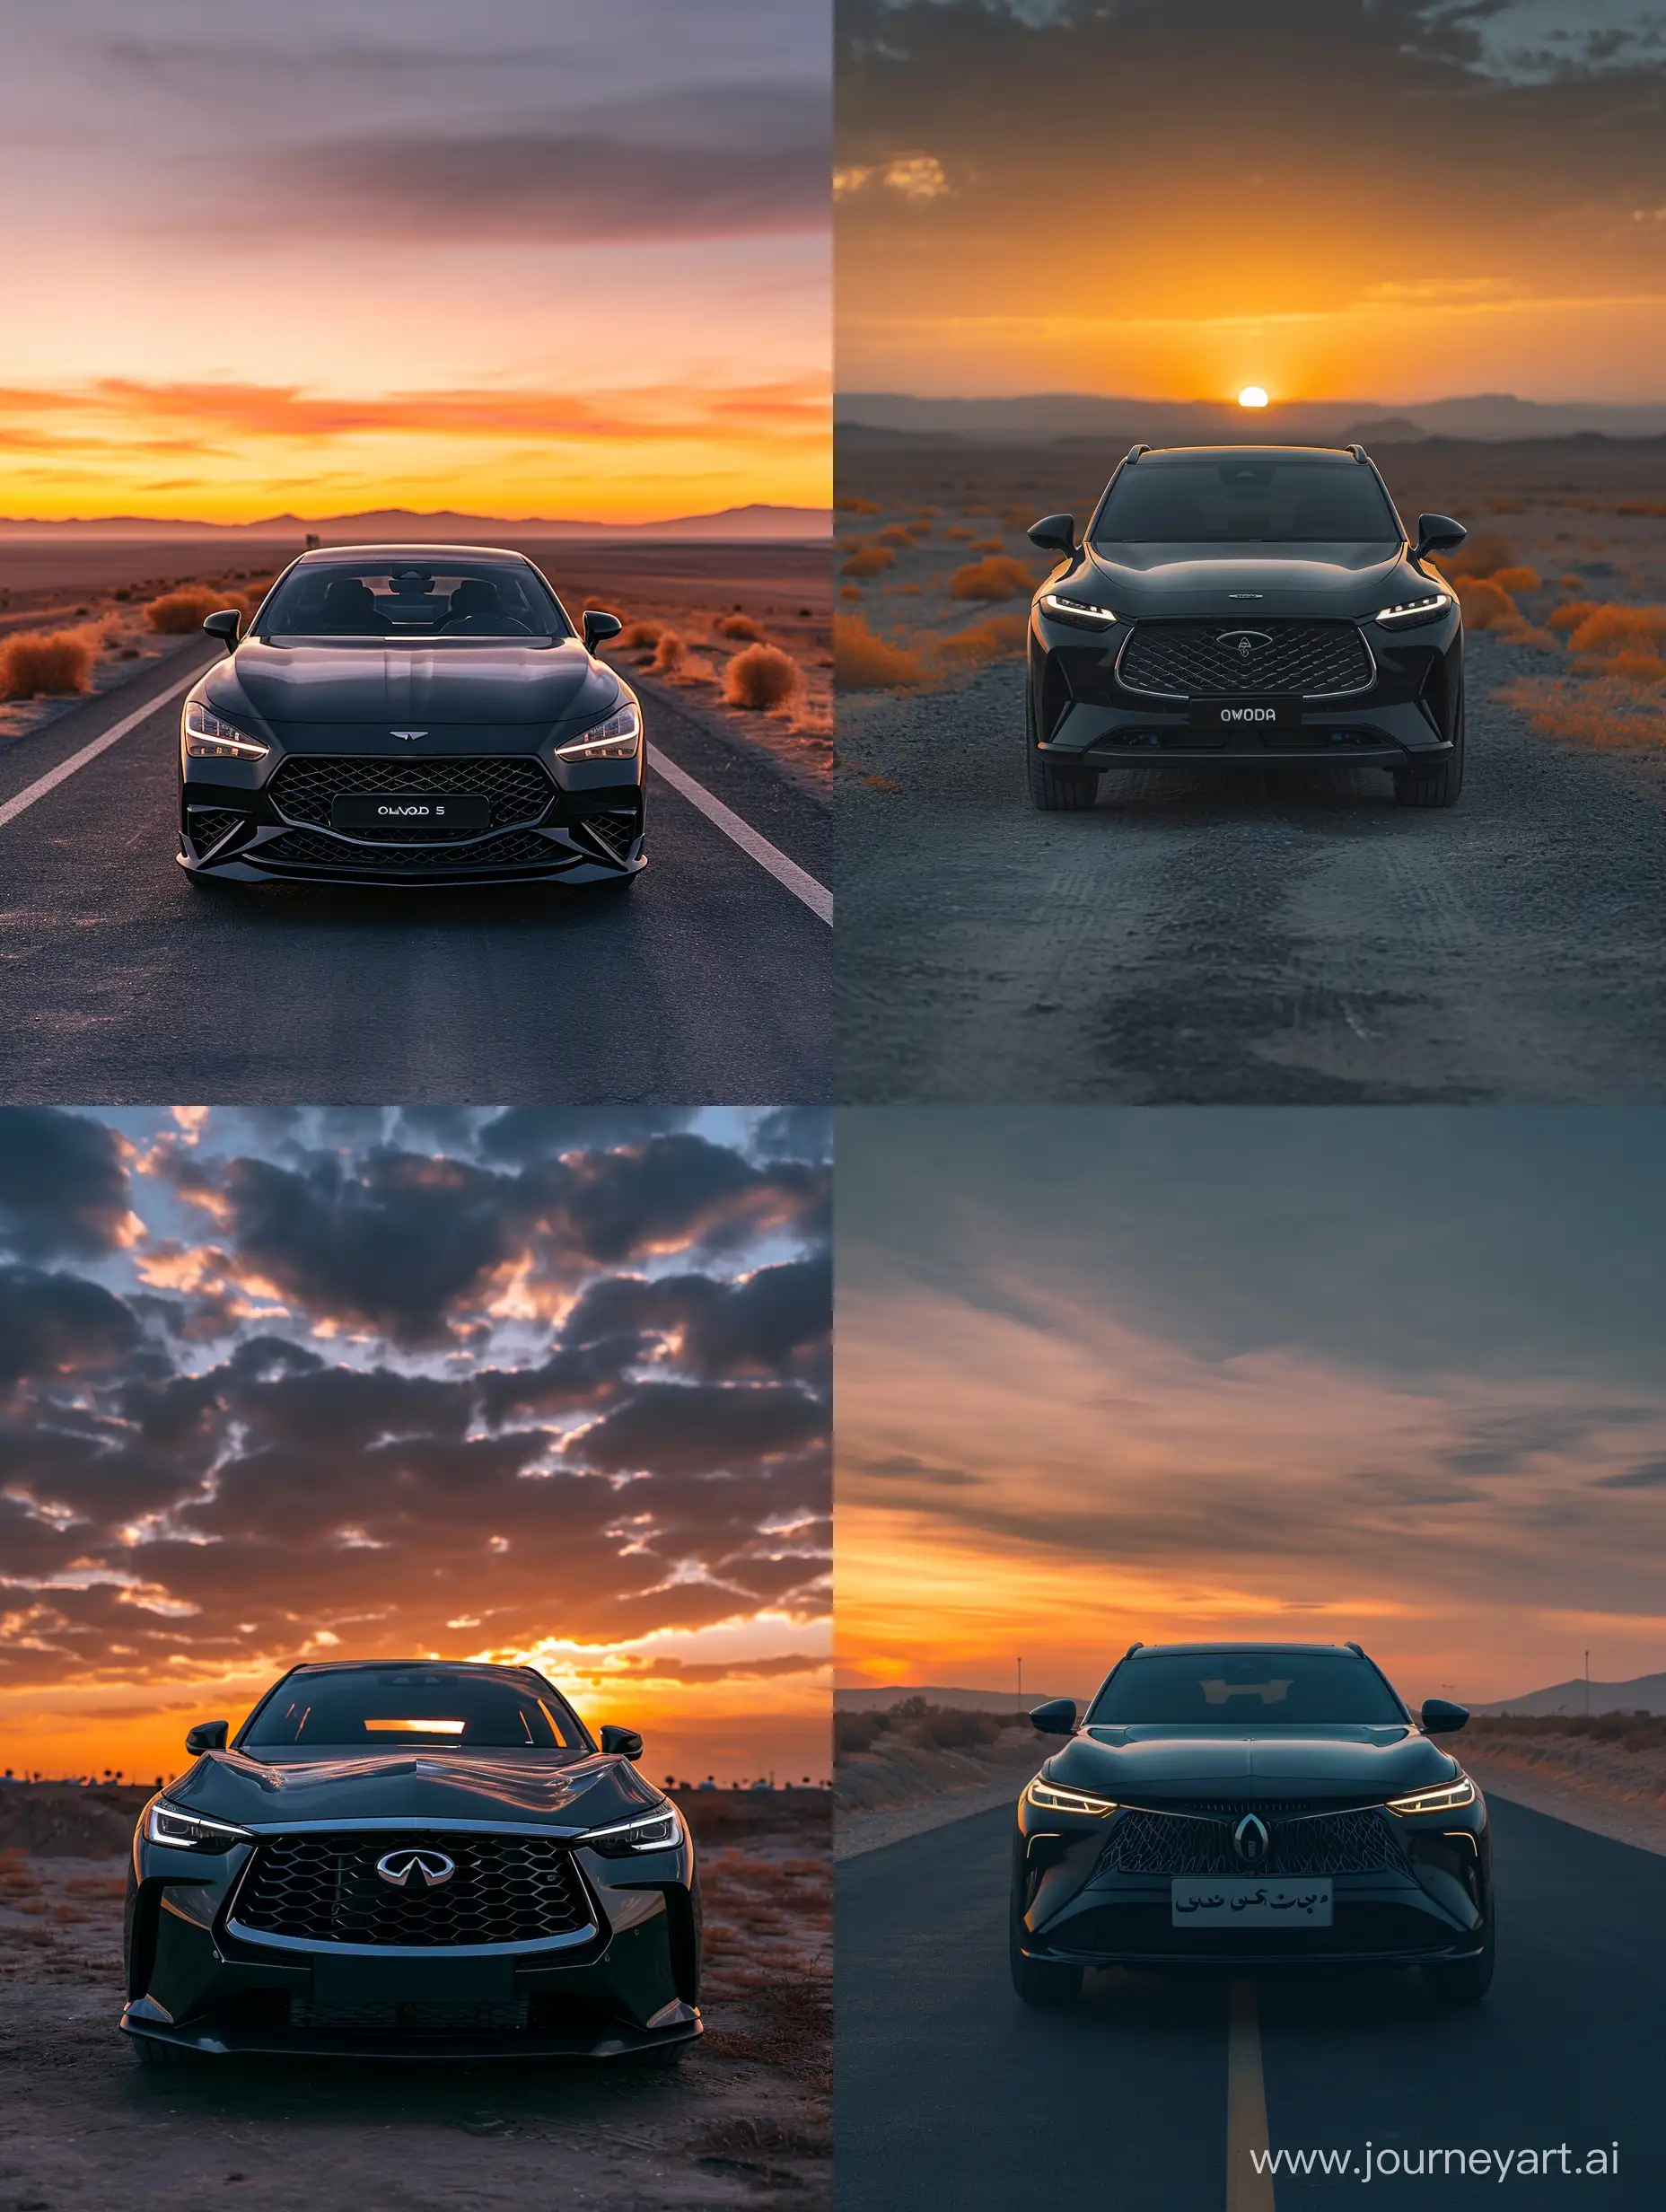 front view of a black chery Model omoda 5 posing at iran, sunrise, 8K, indicrate details, photography